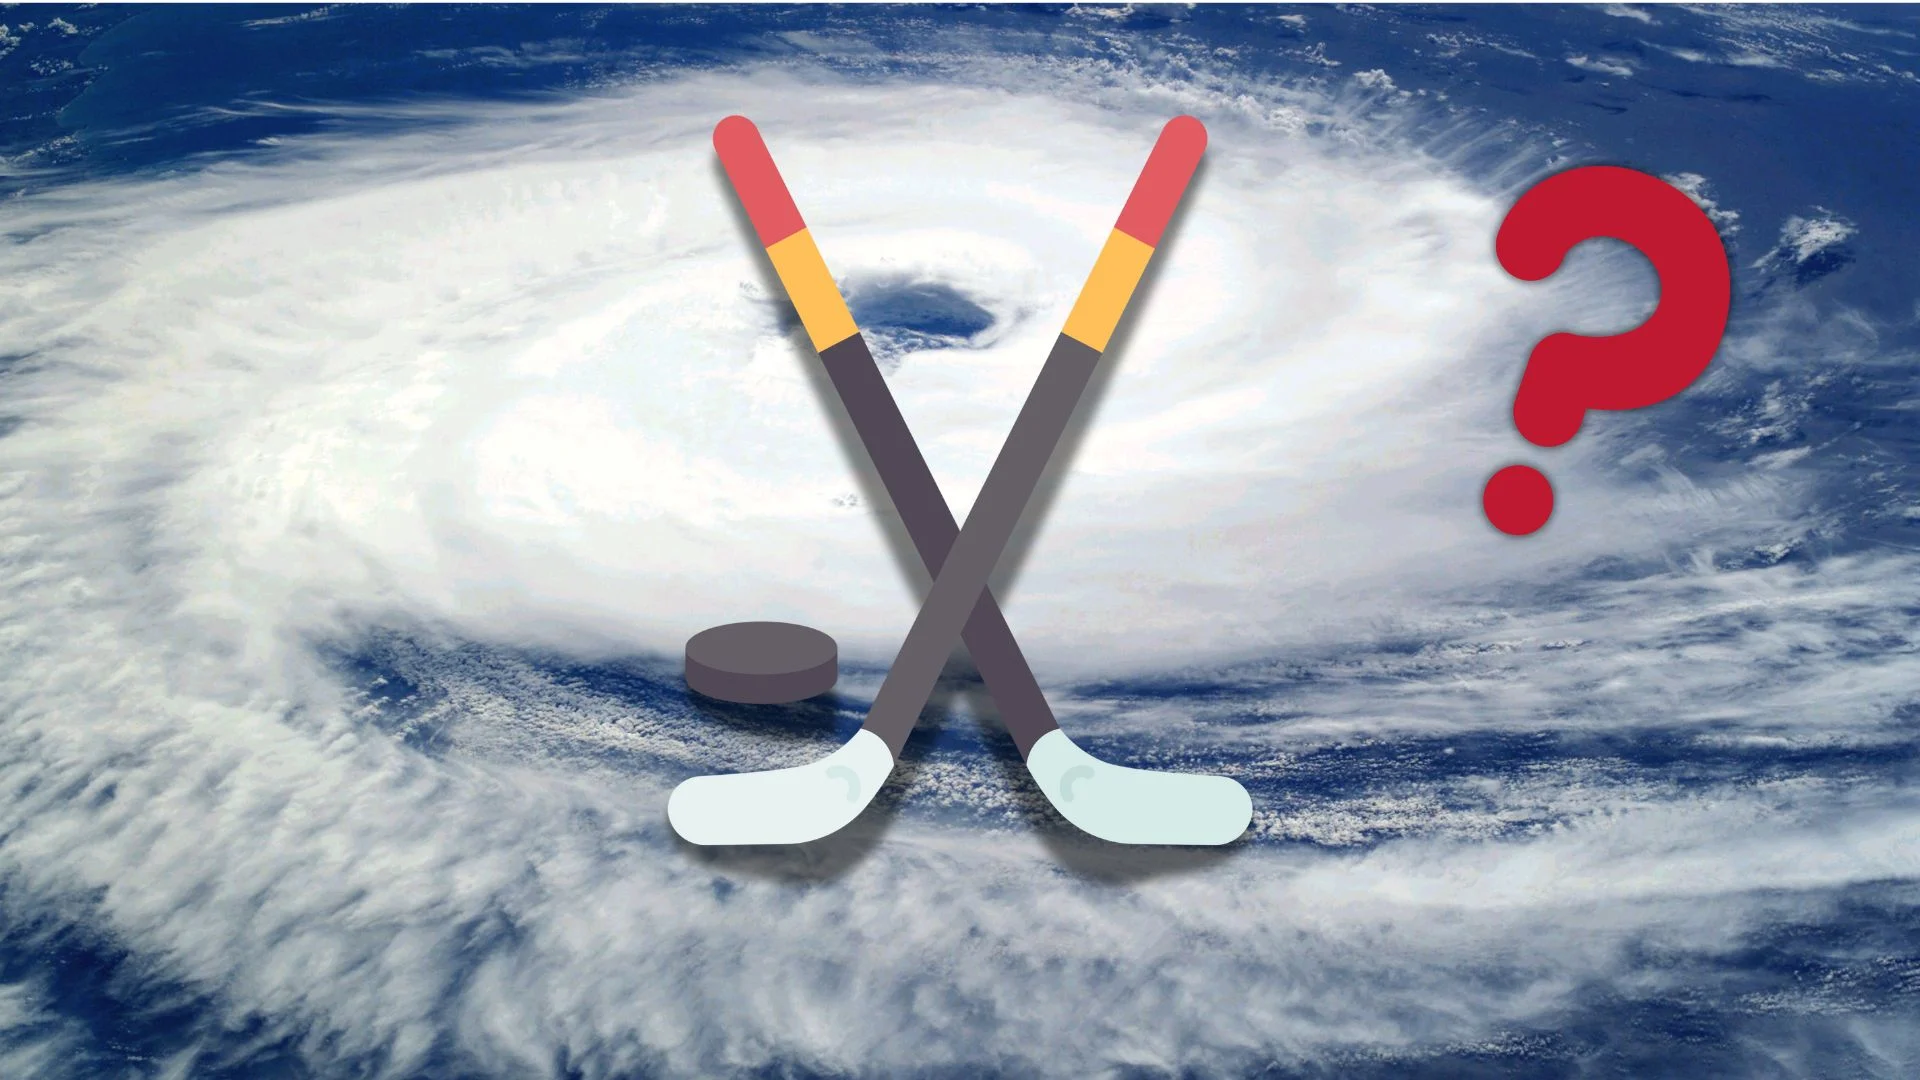 Hurricane season meets the Stanley Cup finals: Is the series at risk?